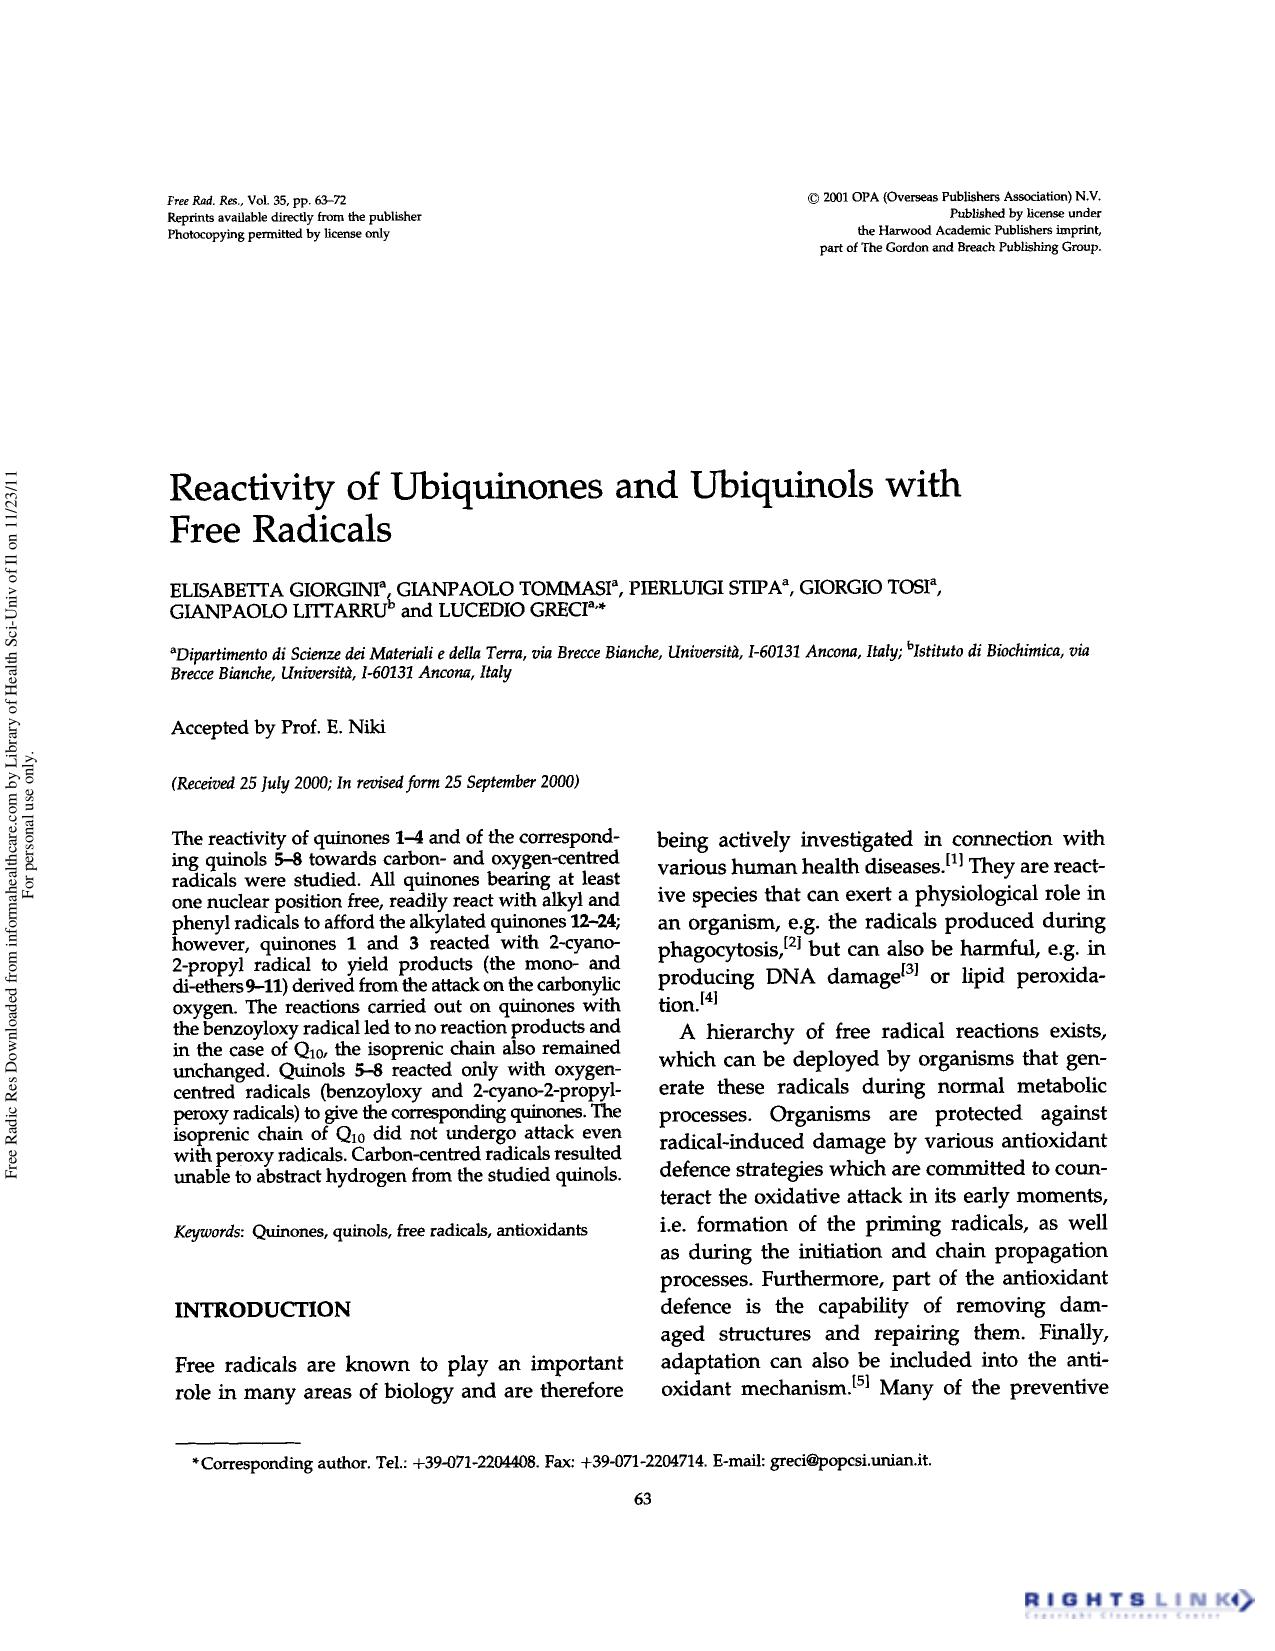 Reactivity of ubiquinones and ubiquinols with free radicals by unknow